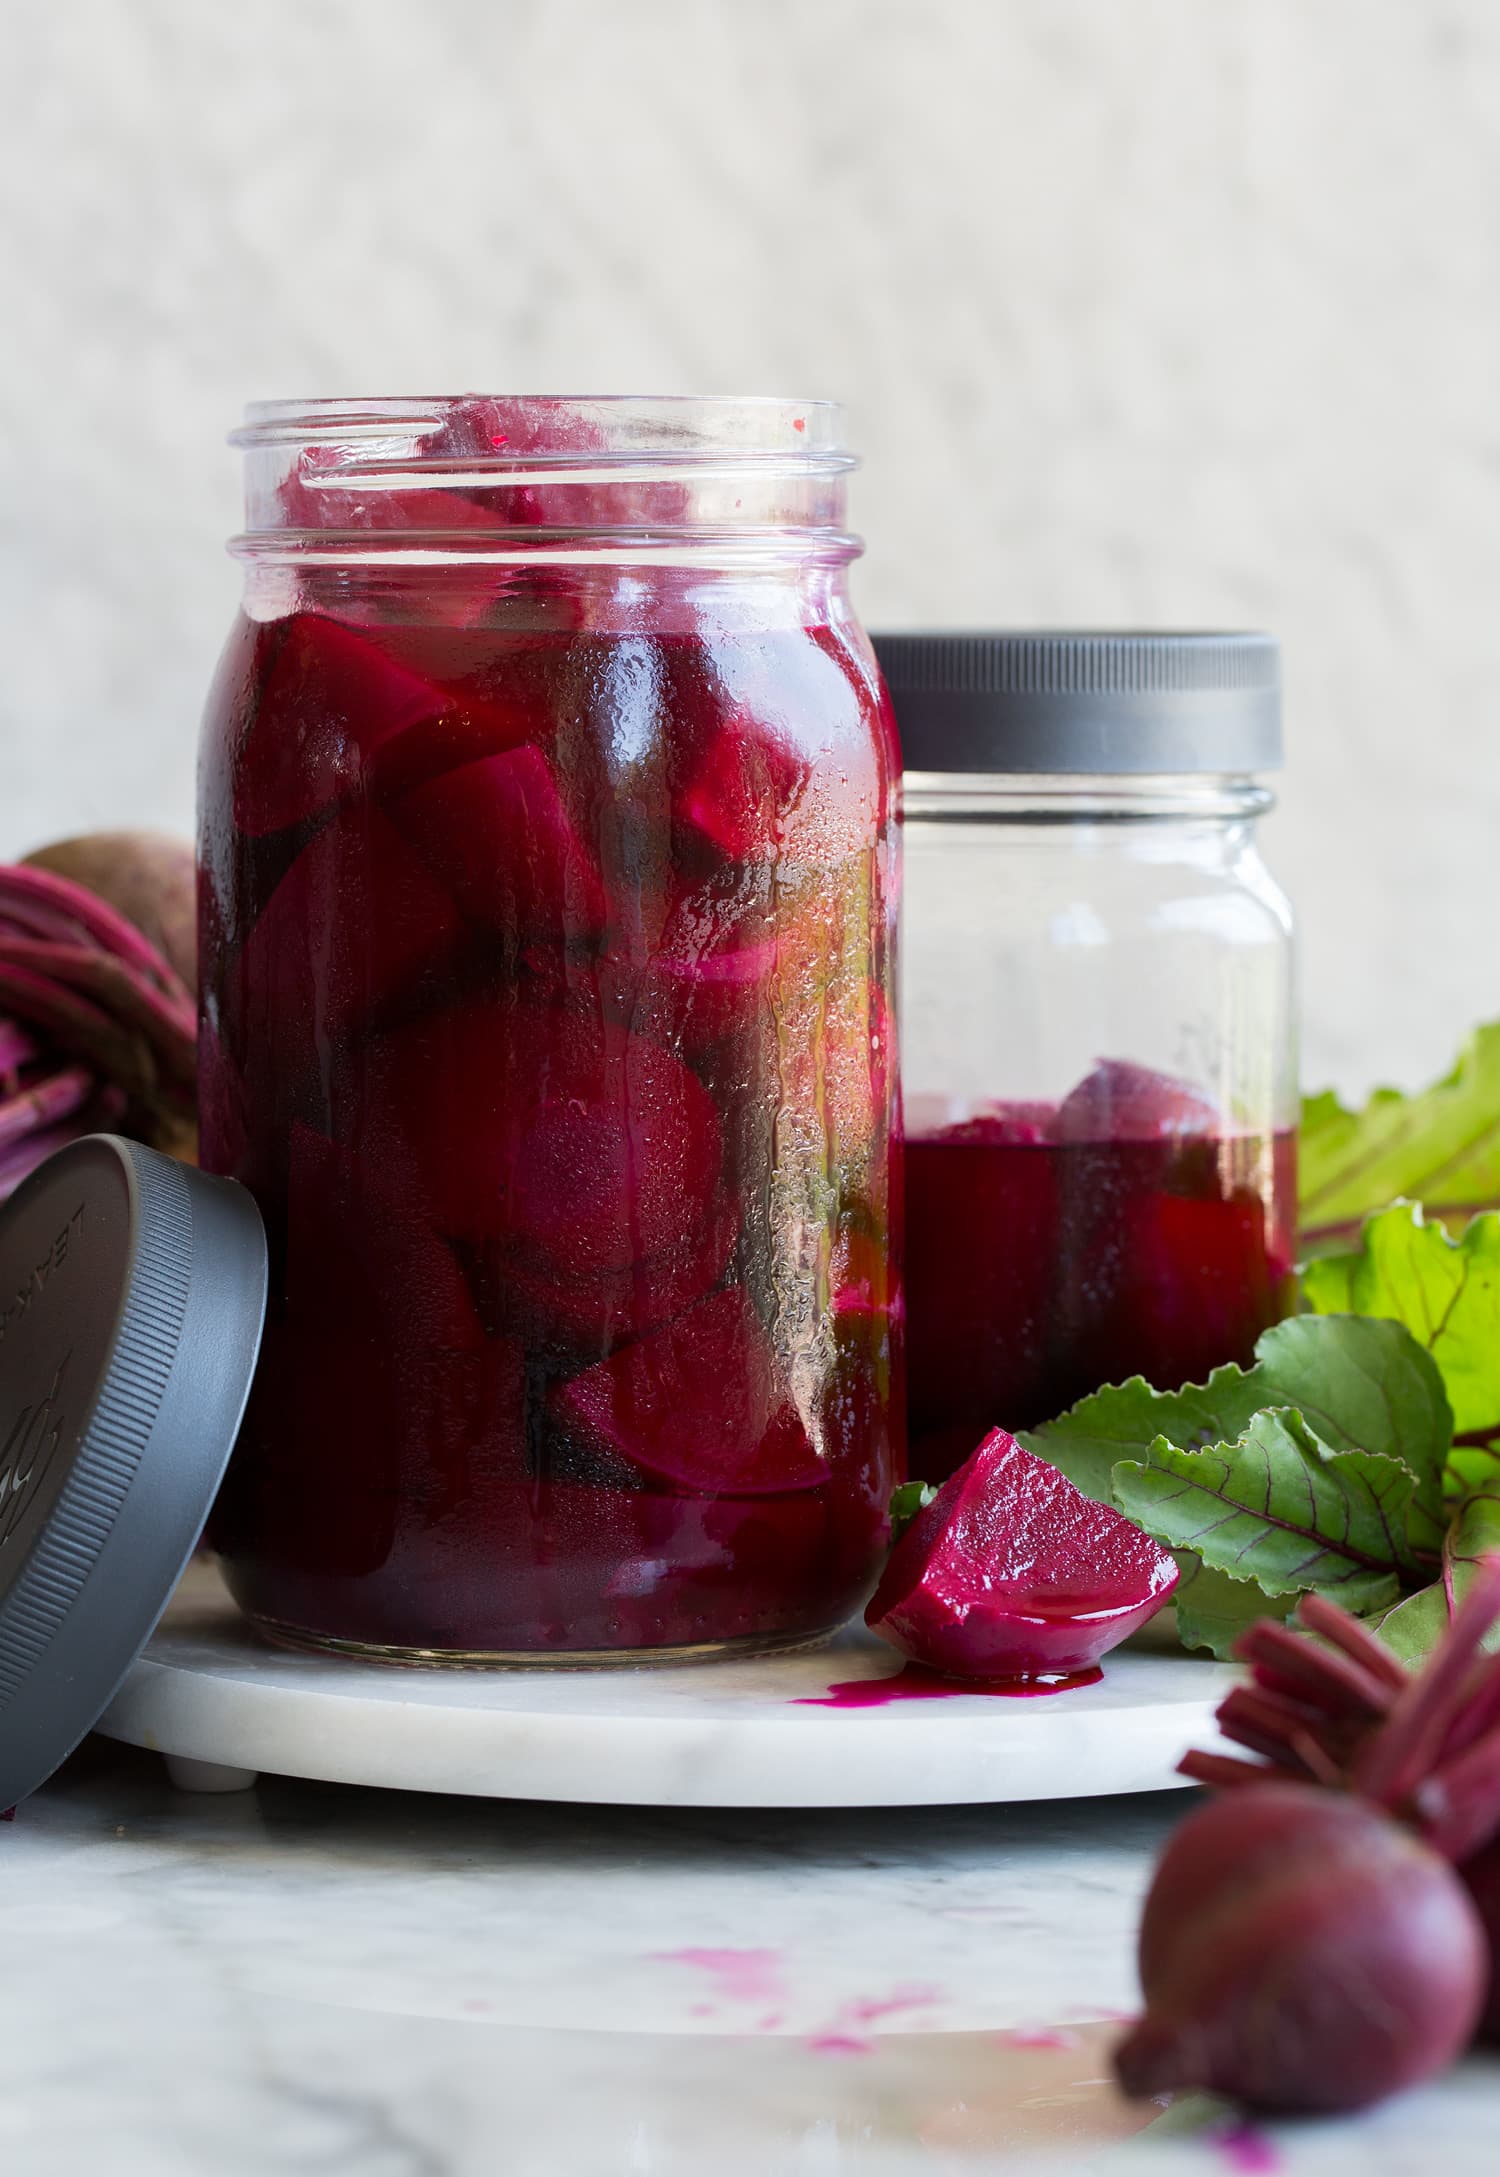 Refrigerator pickled beets in two jars.